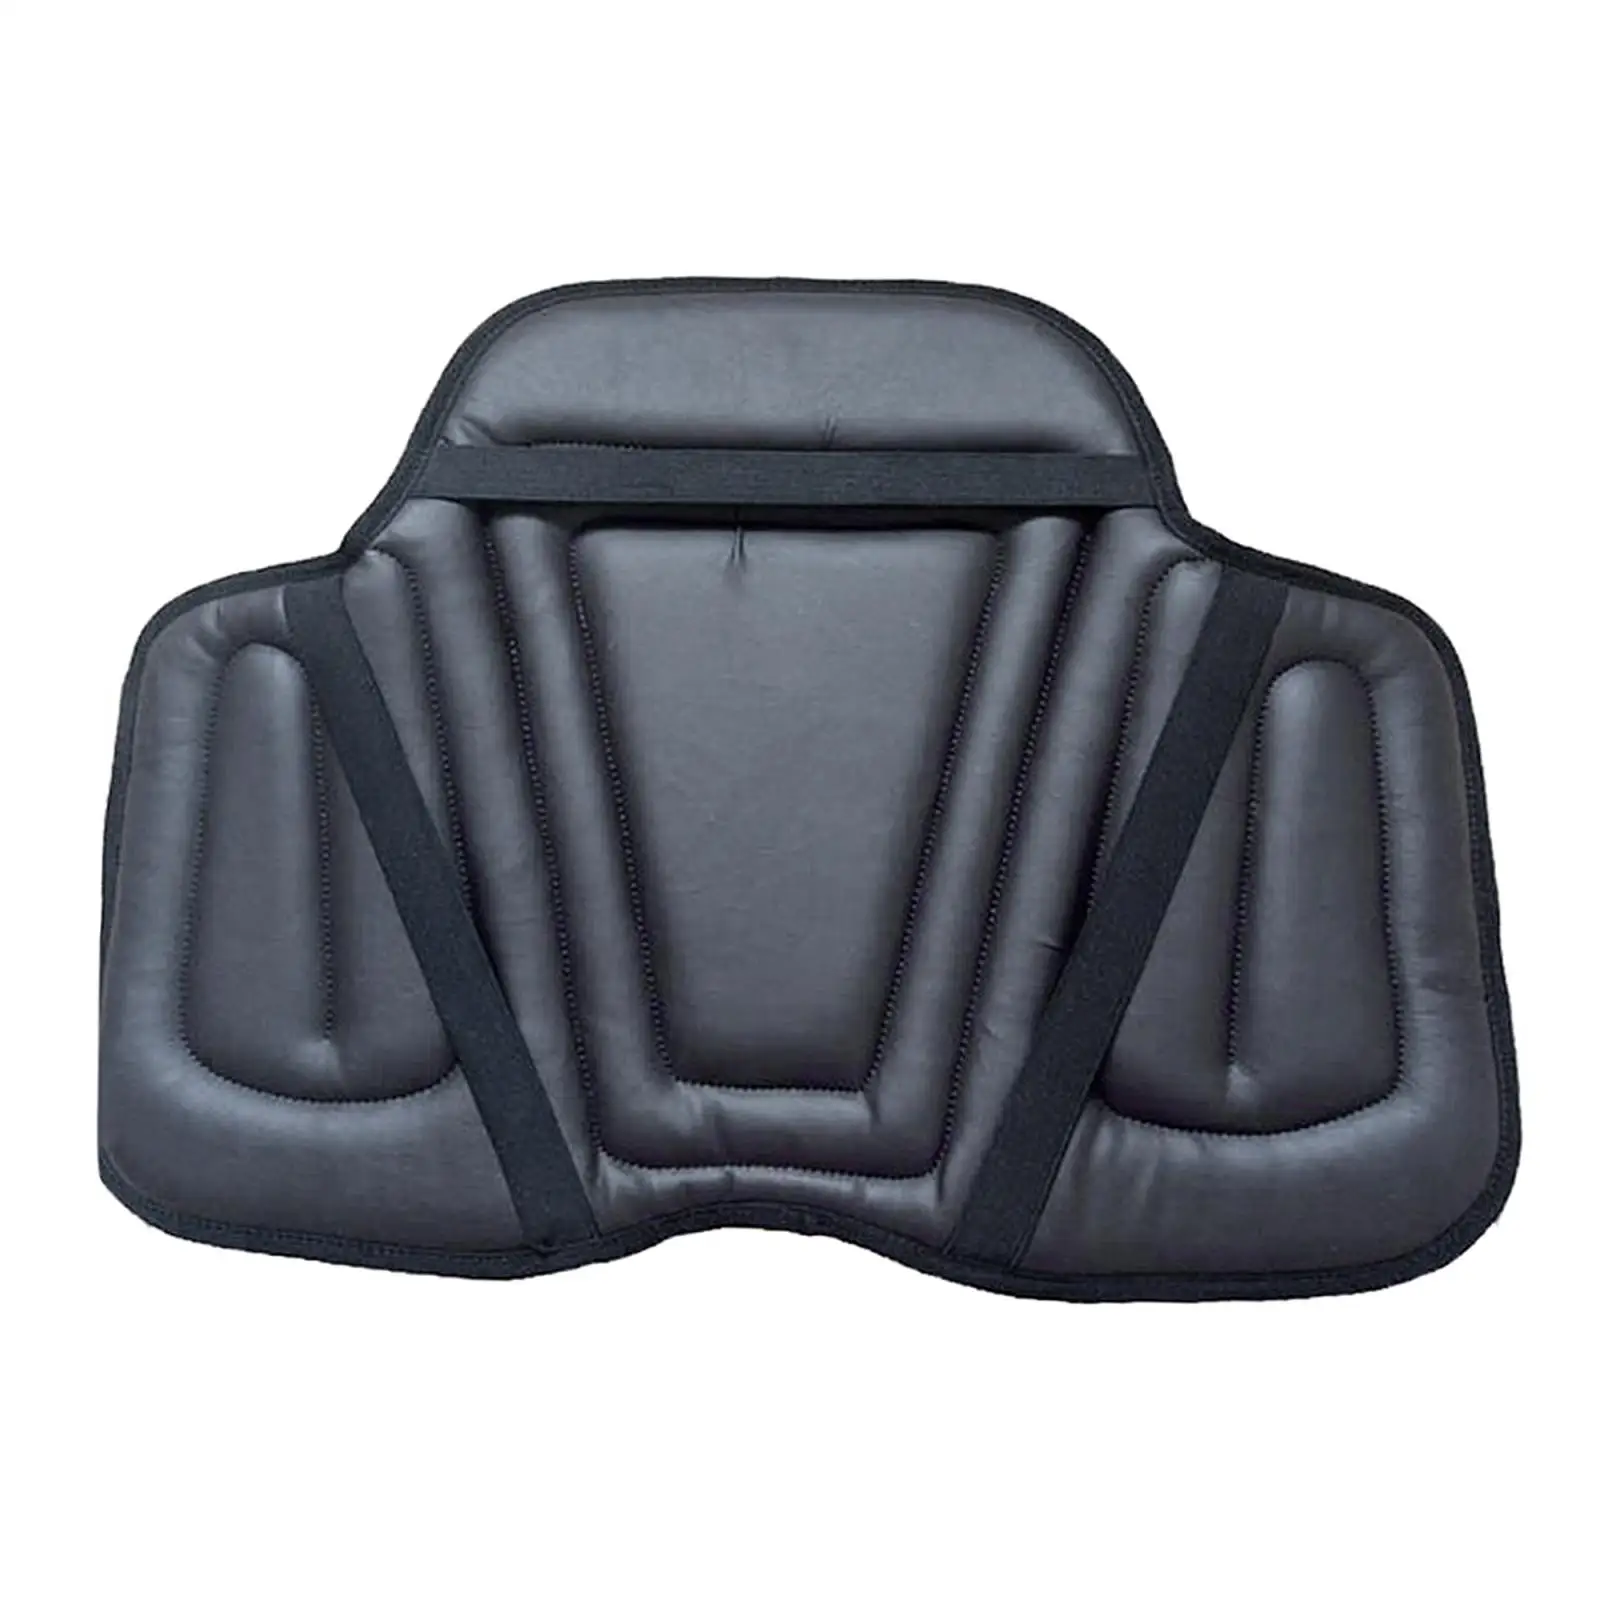 Leather Horse Riding Seat Shock Absorbing Memory Foam Saddle Cushion for Outdoor Equestrian Riding Horse Equipment Accessories